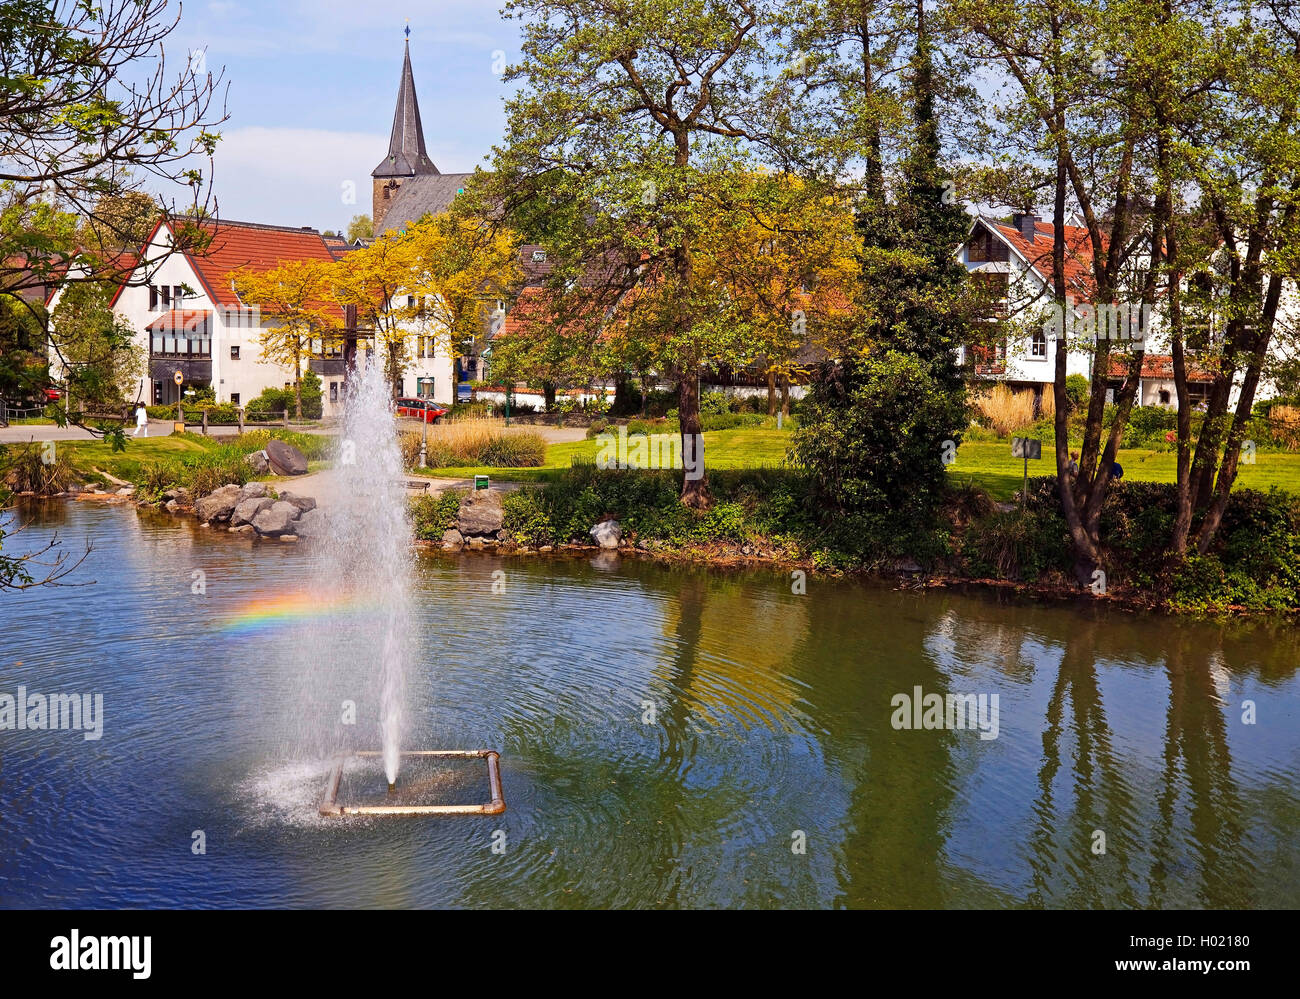 fountain and municipal church in the old city of Wuelfrath, Germany, North Rhine-Westphalia, Bergisches Land, Wuelfrath Stock Photo